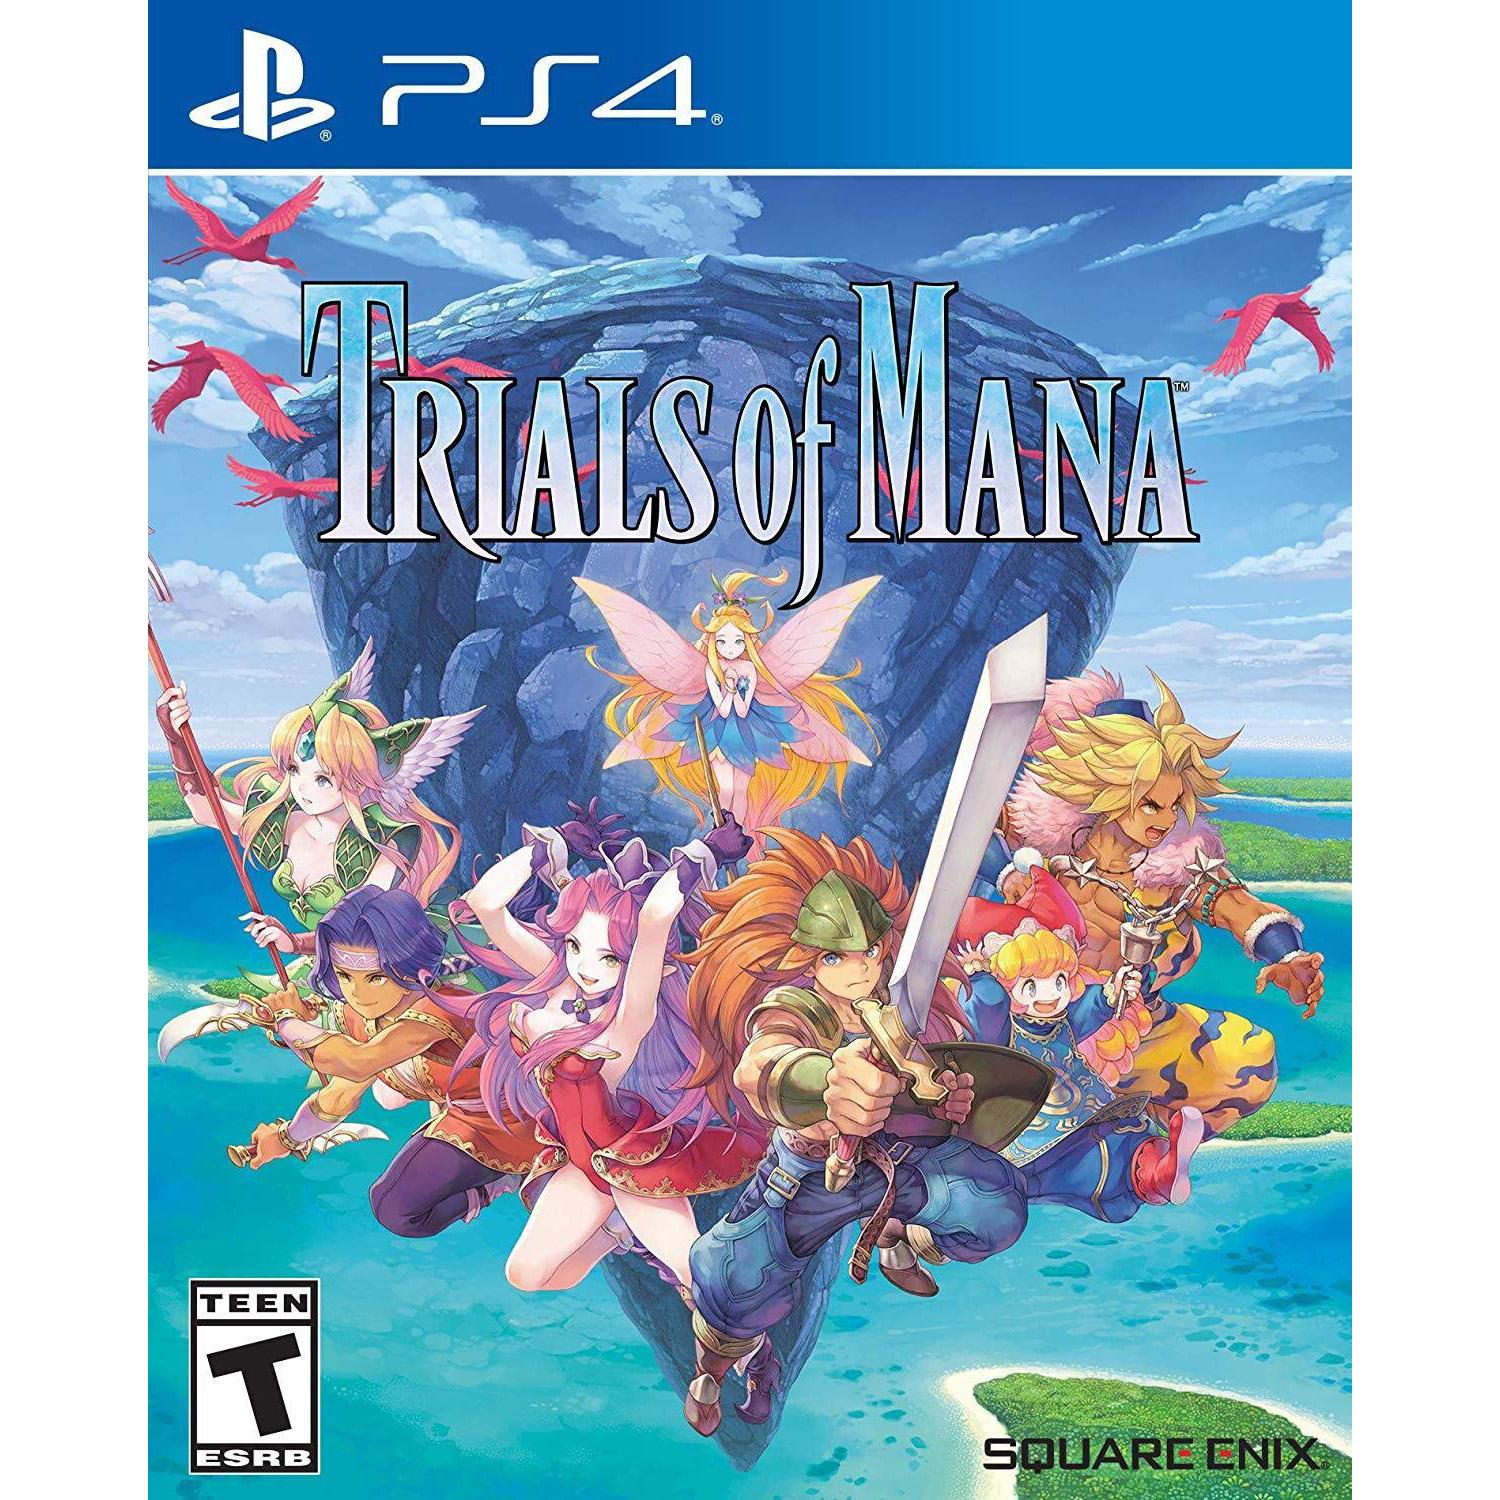 Trials of Mana PS4 for $19.99